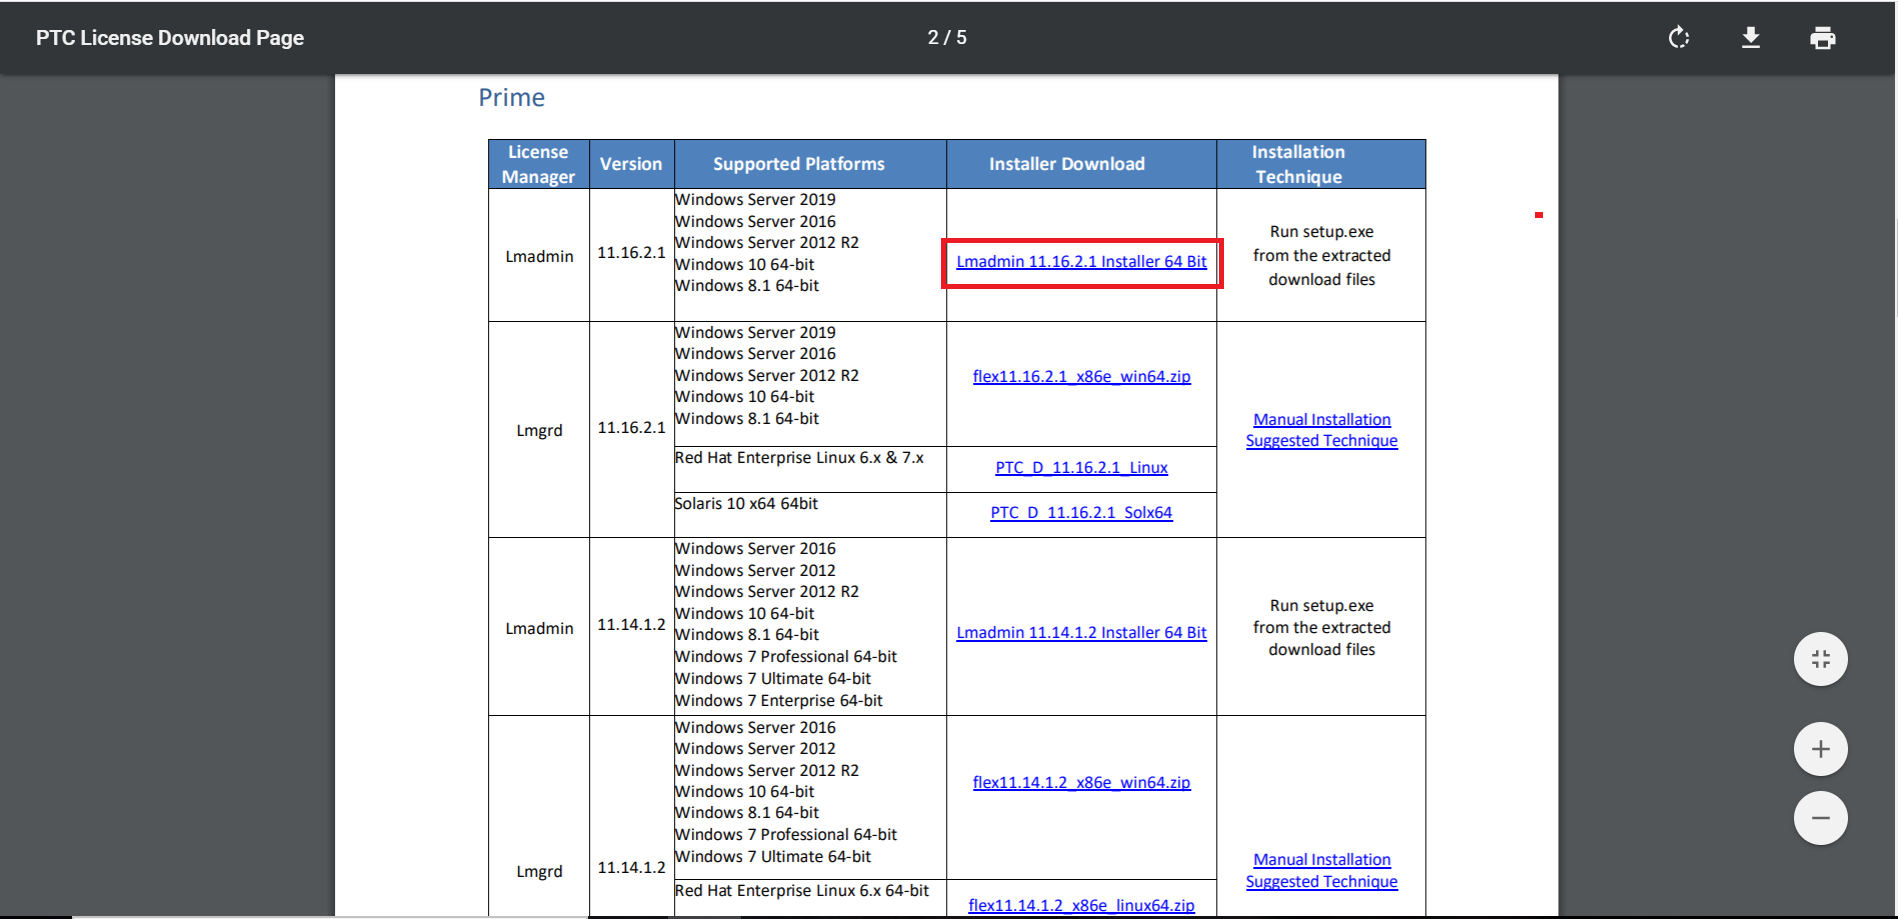 PTC License Download Page.PNG